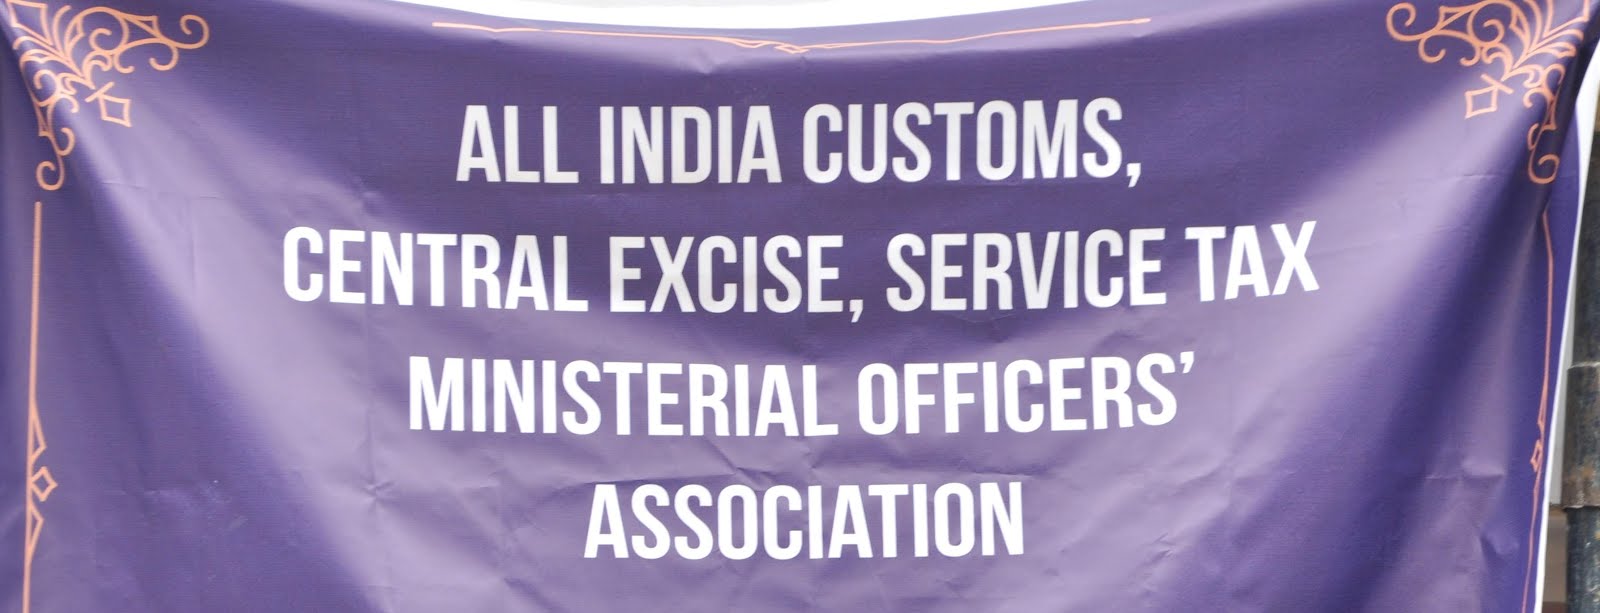 KARNATAKA CUSTOMS CENTRAL EXCISE SERVICE TAX AND LTU MINISTERIAL OFFICERS ASSOCIATION